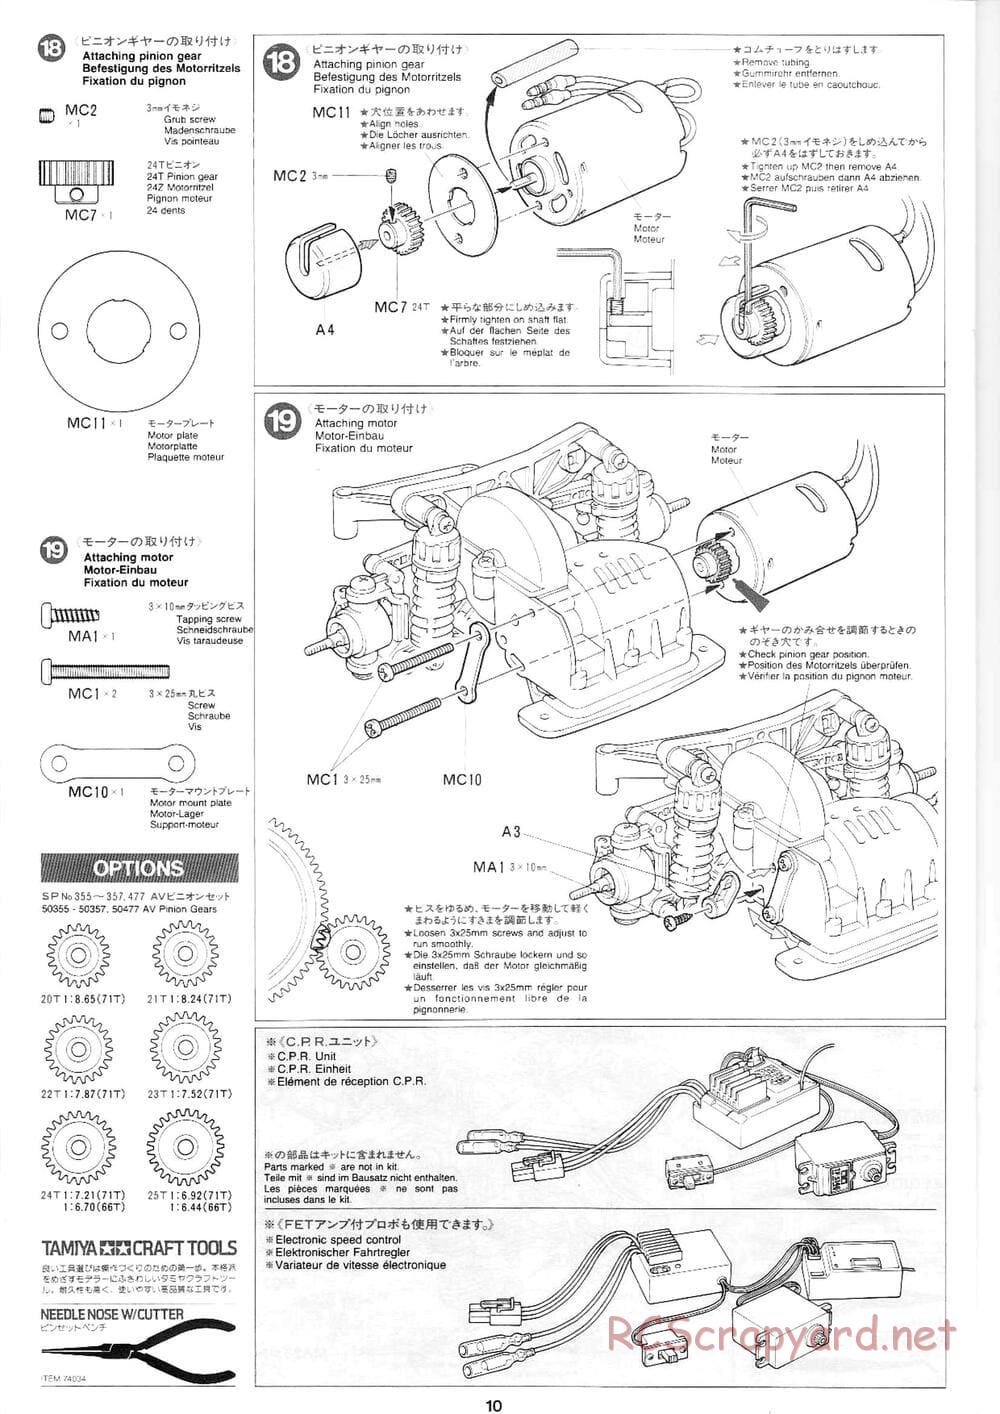 Tamiya - Volkswagen New Beetle - FF-01 Chassis - Manual - Page 8